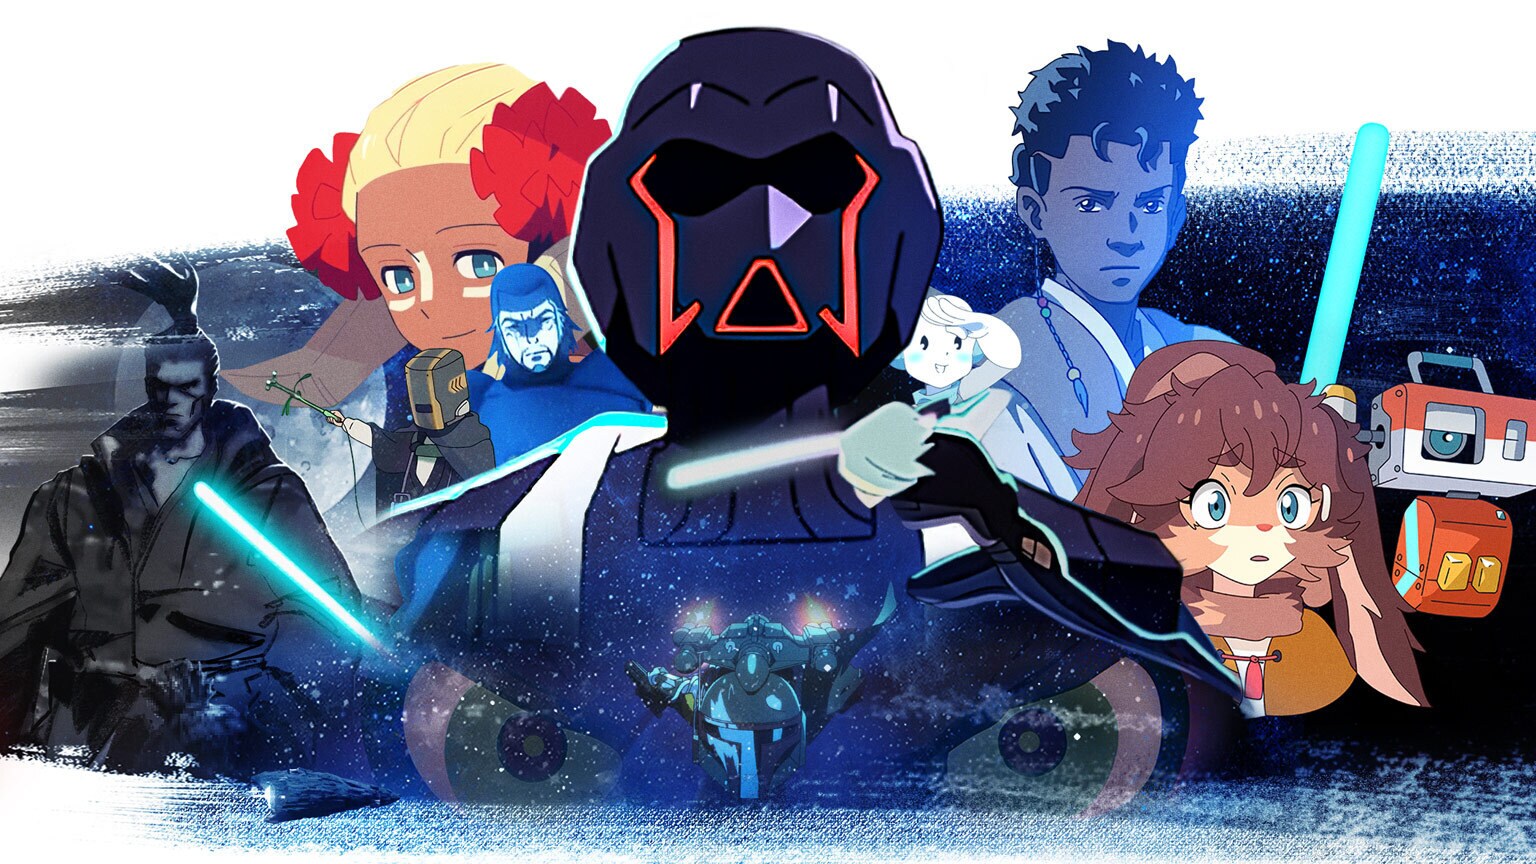 Star Wars: Visions' on Disney Plus - How to Watch the Anime Anthology